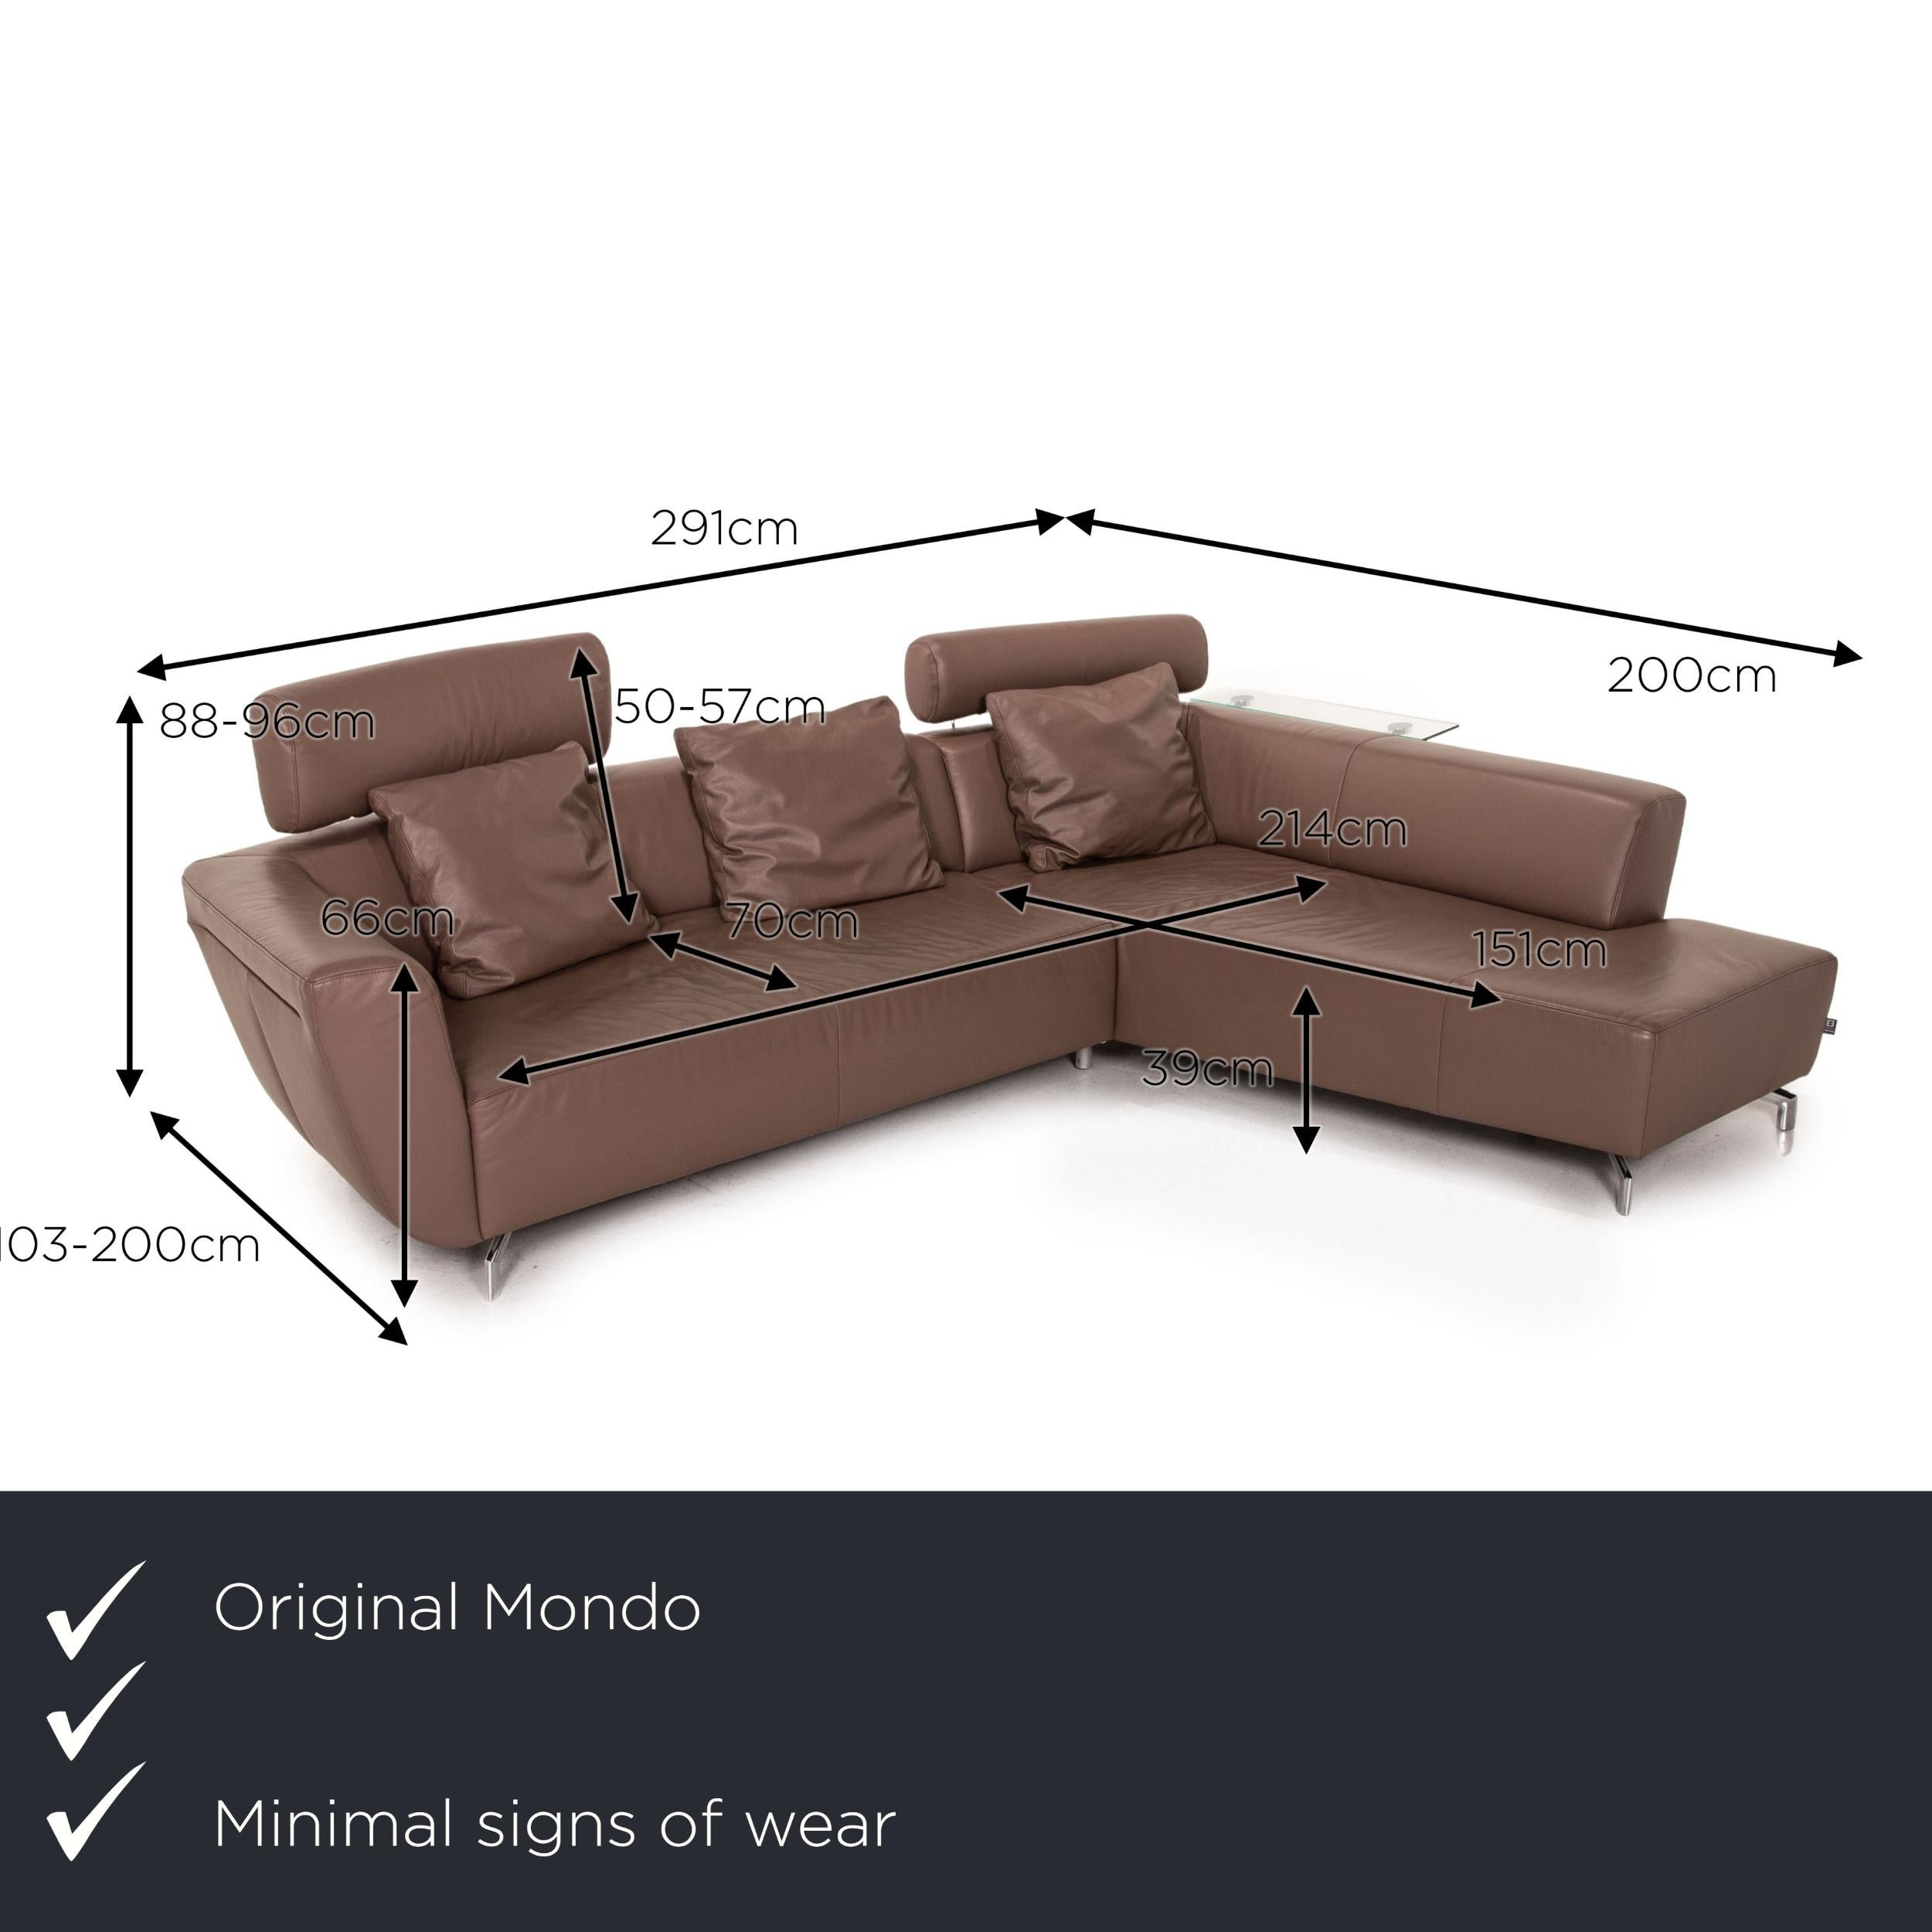 We present to you a Mondo leather corner sofa gray brown function sofa couch.


 Product measurements in centimeters:
 

Depth: 103
Width: 291
Height: 88
Seat height: 39
Rest height: 66
Seat depth: 70
Seat width: 214
Back height: 50.
 